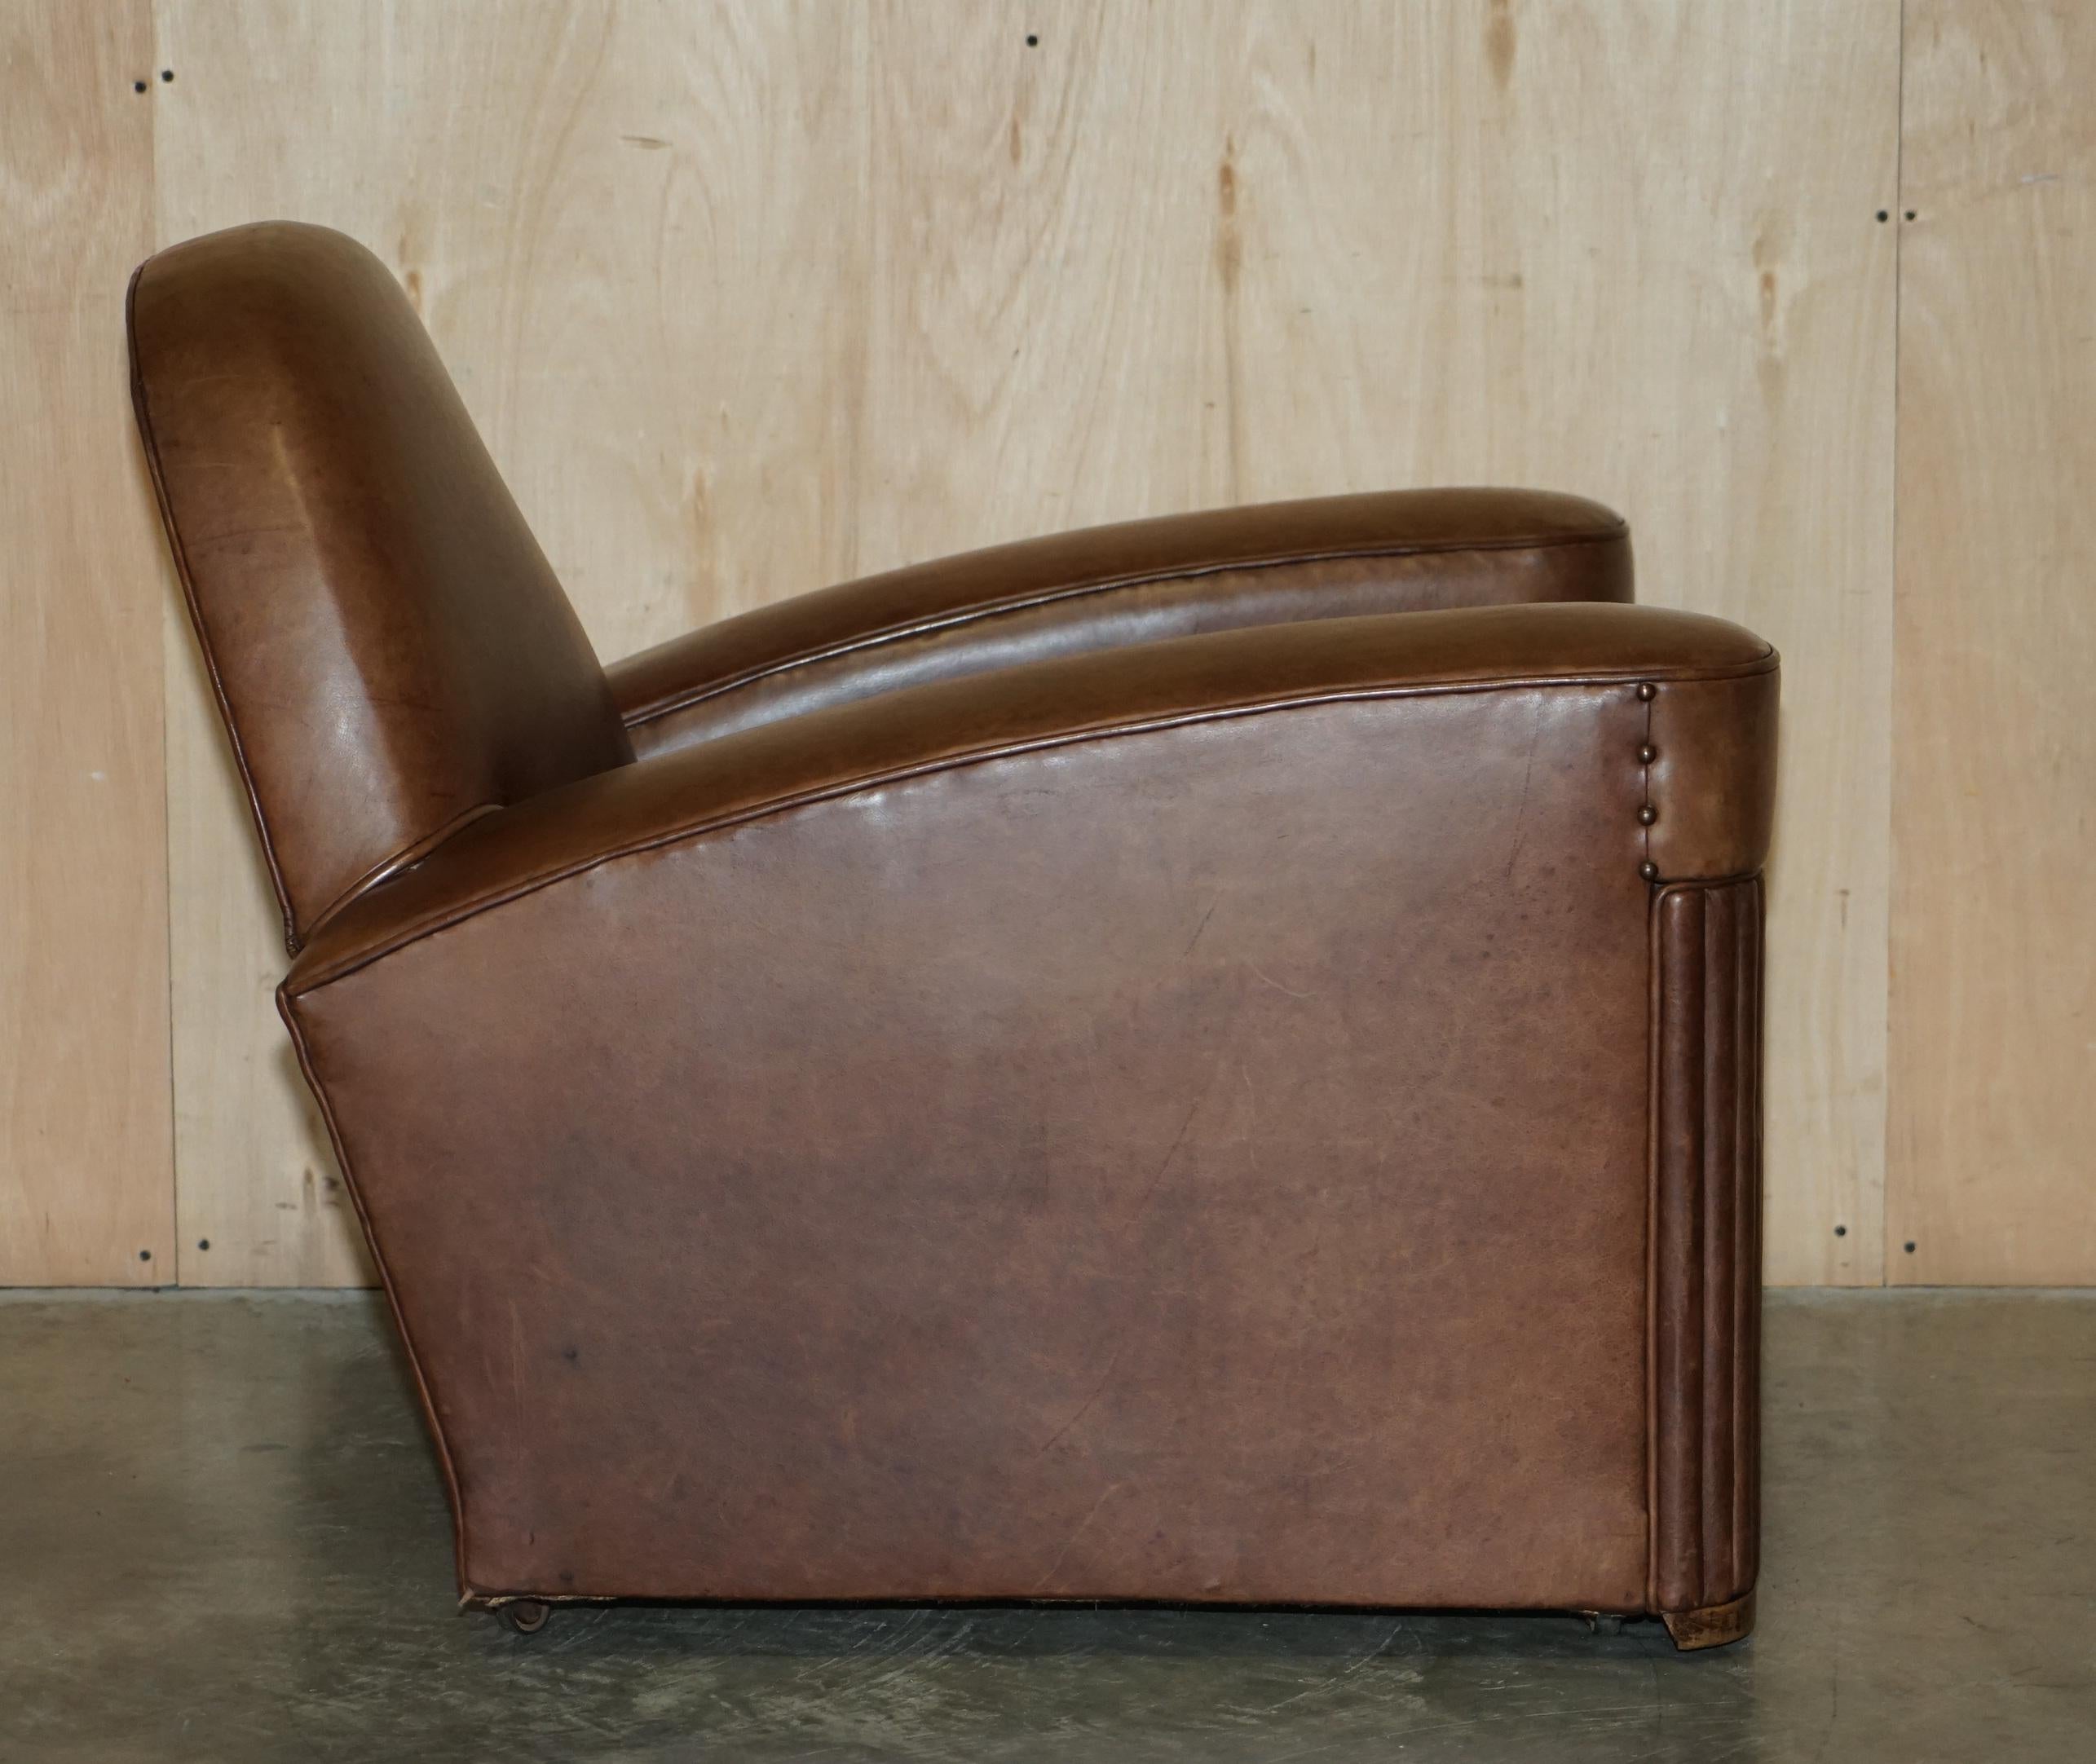 STUNNING PAIR OF ORIGINAL ART DECO HERITAGE BROWN LEATHER CIRCA 1920'S ARMCHAIRs For Sale 10